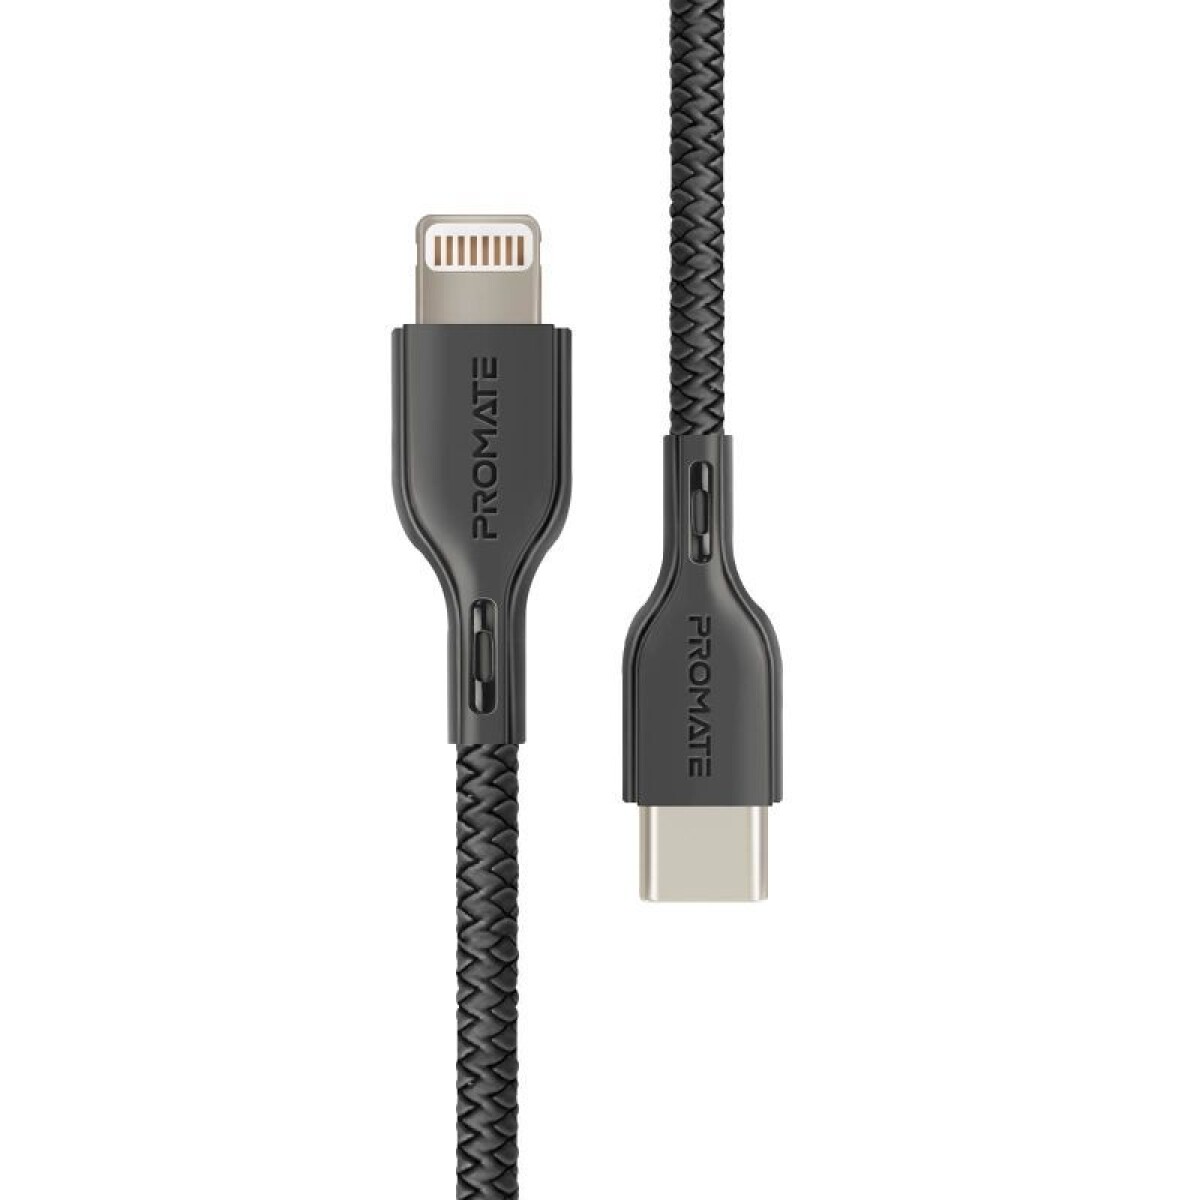 PROMATE POWERLINK CABLE USB-C ALIGHTNING 1,2M - Promate Powerlink Cable Usb-c Alightning 1,2m 